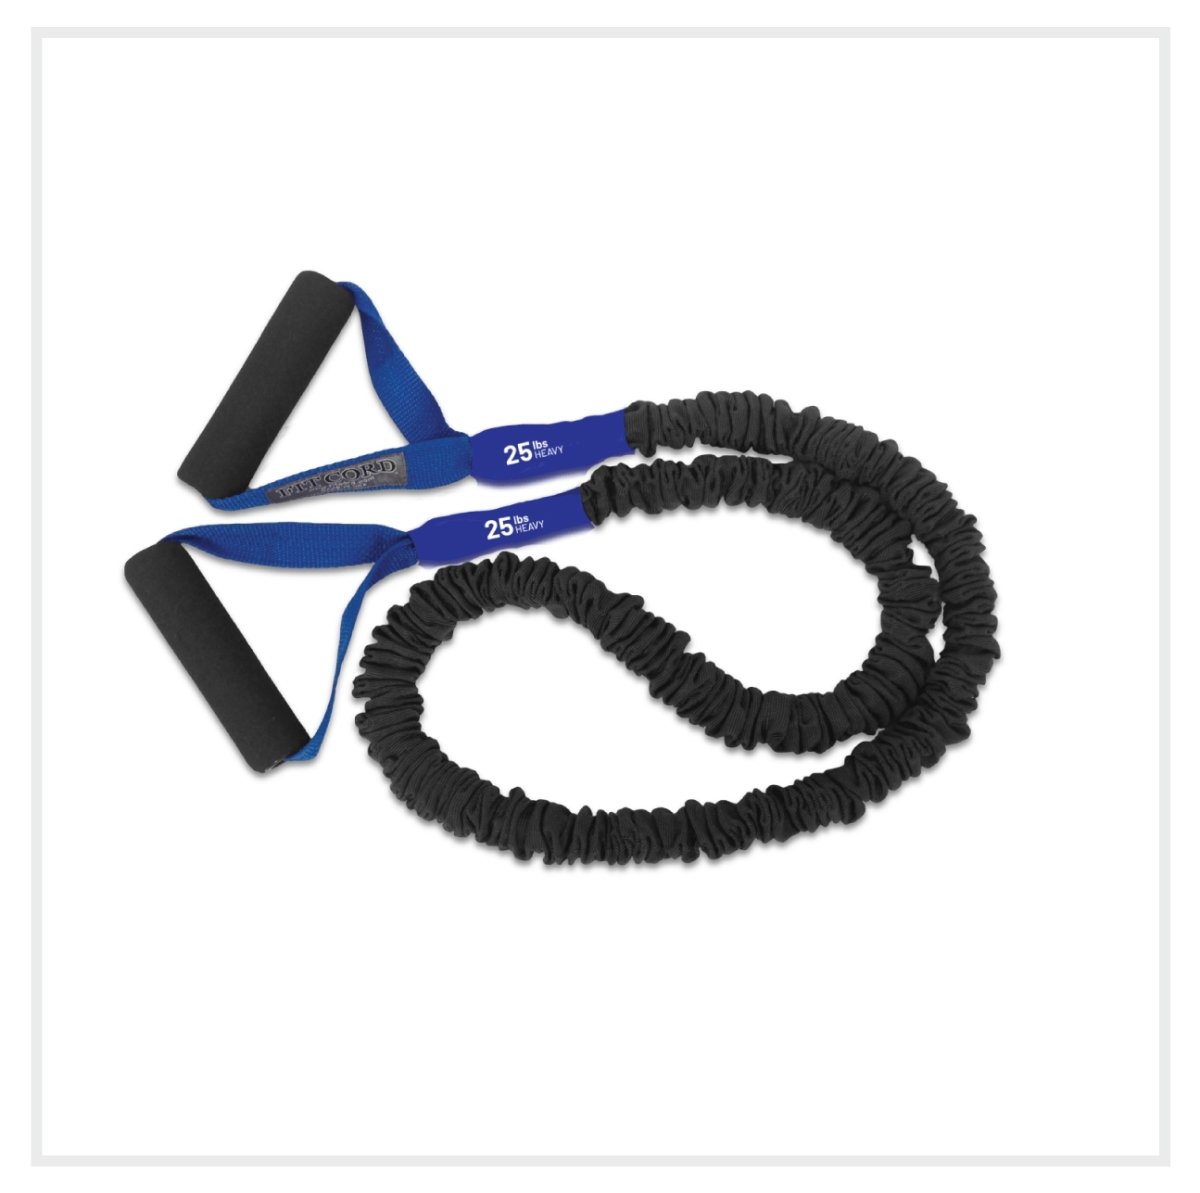 FitCord Resistance Band- Heavy (25lb)